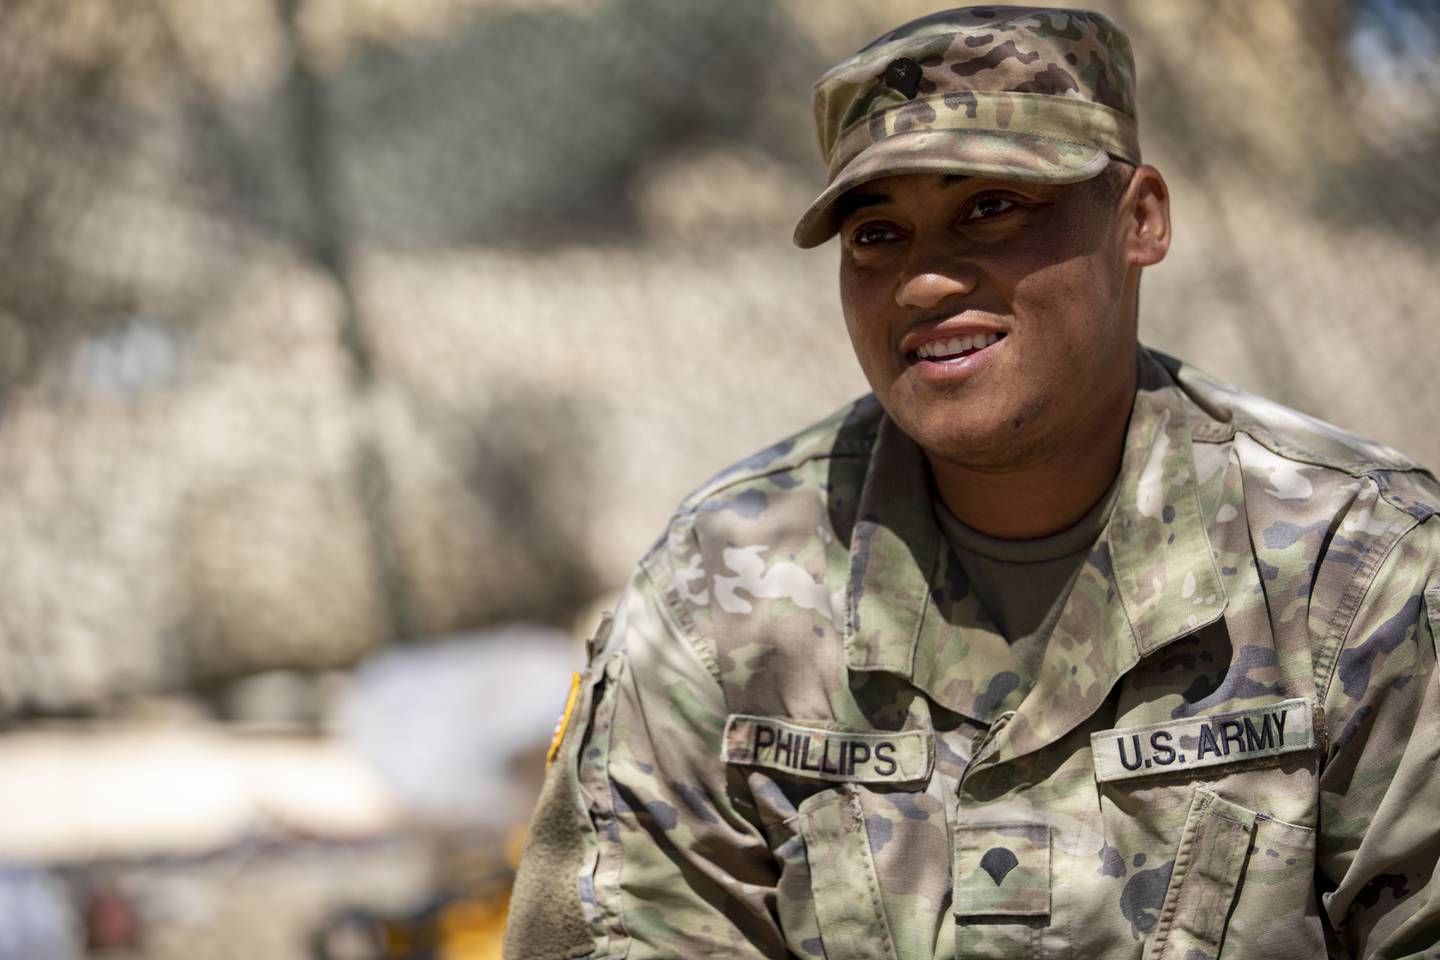 Army Reserve Spc. Leo Phillips, a water treatment specialist assigned to the 968th Quartermaster Company based in Tustin, California, shares his story as a transgender soldier during the Quartermaster Liquid Logistics Exercise at Camp Pendleton in 2022.